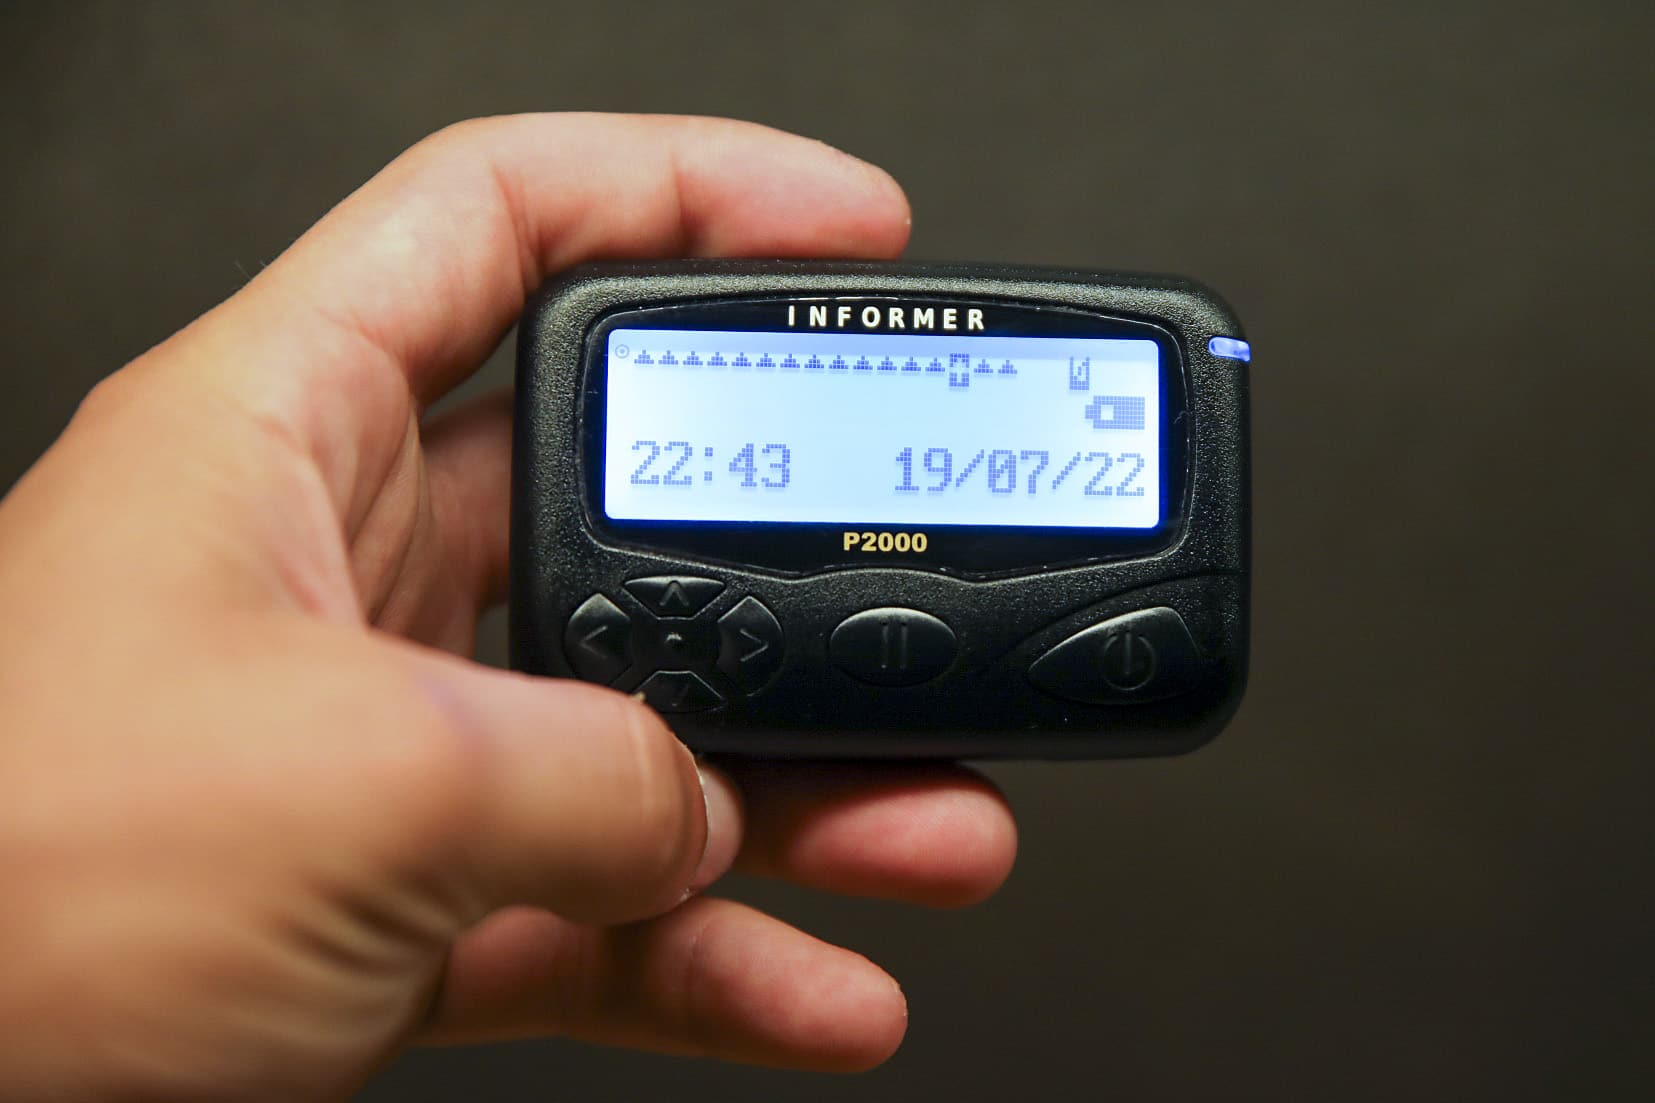 P2000 pager